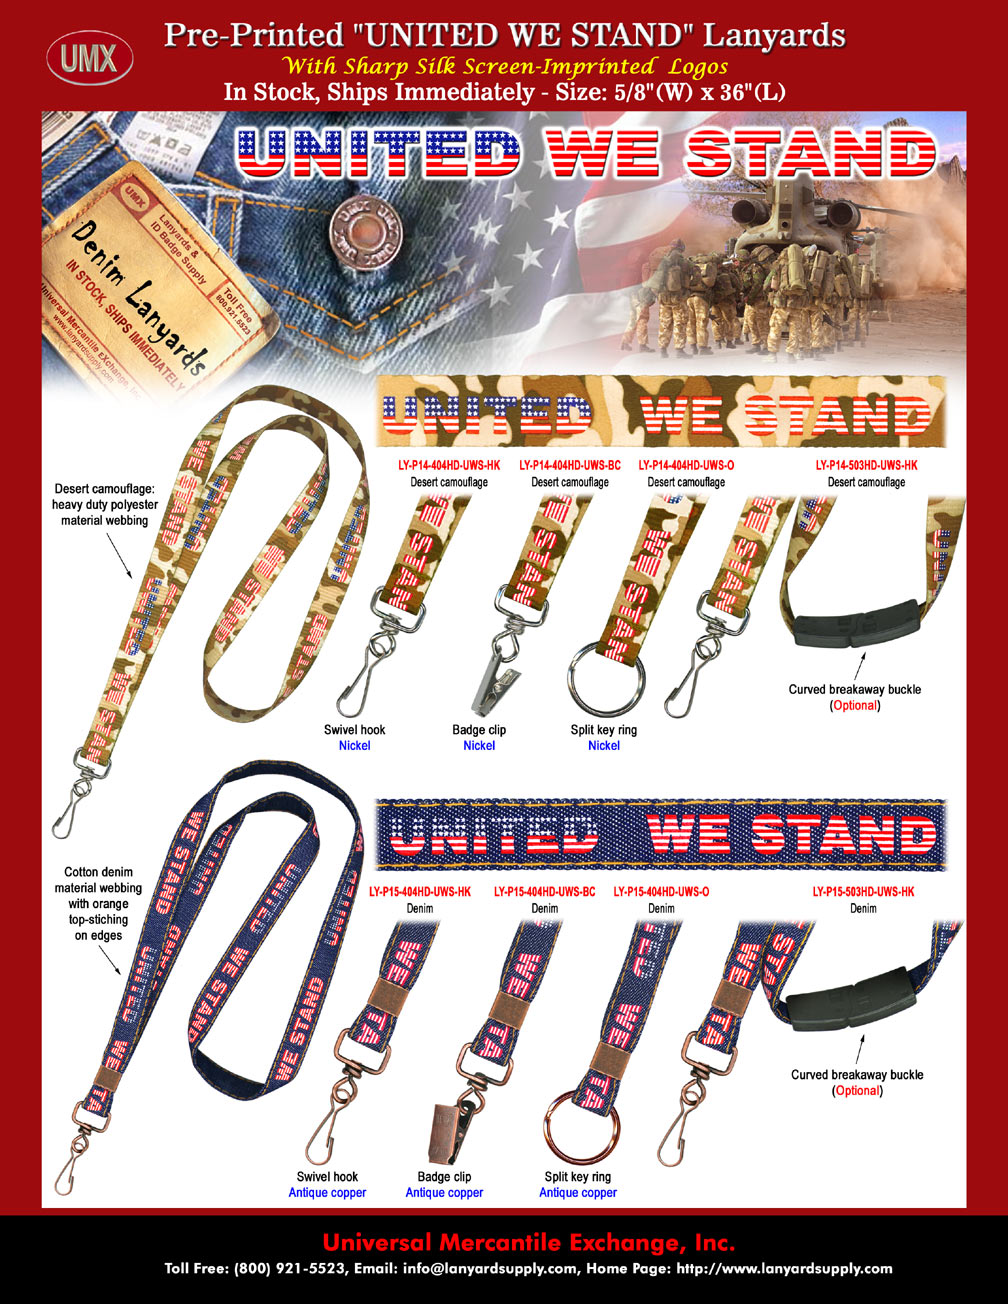 Pre-Printed "United We Stand" Lanyards -  With Denim and Desert Camouflage Background